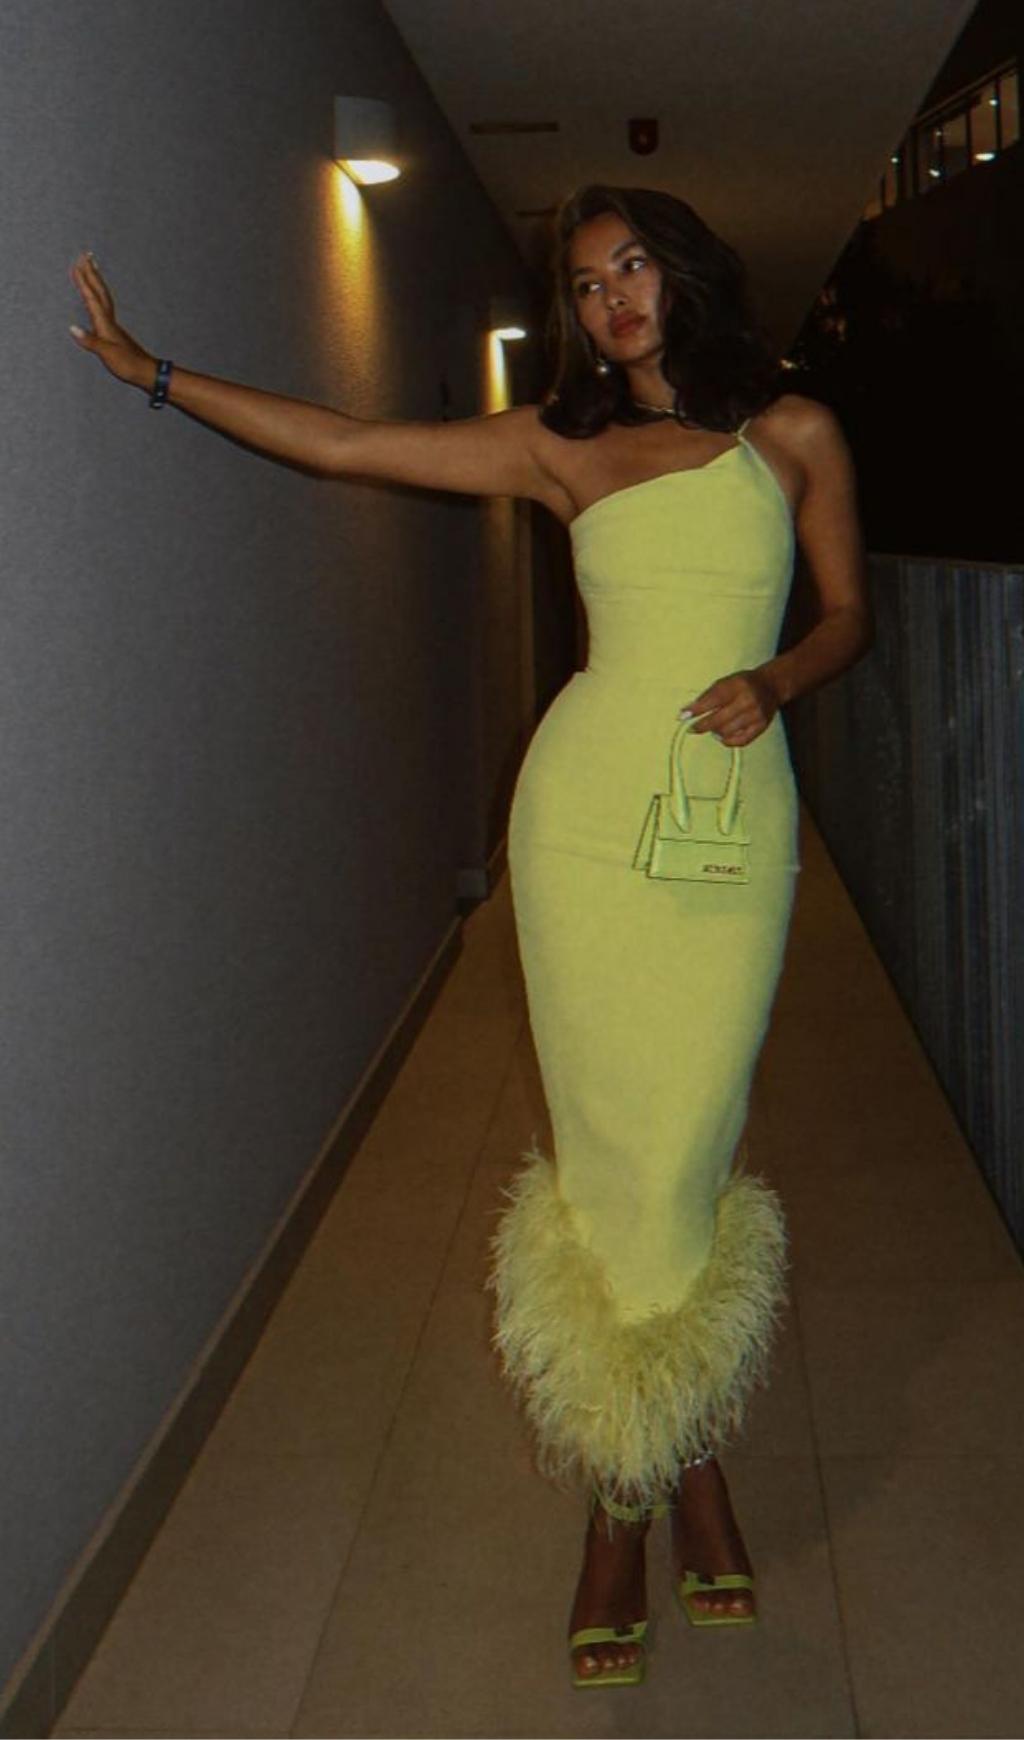 BANDAGE FEATHER BACKLESS MAXI DRESS IN YELLOW